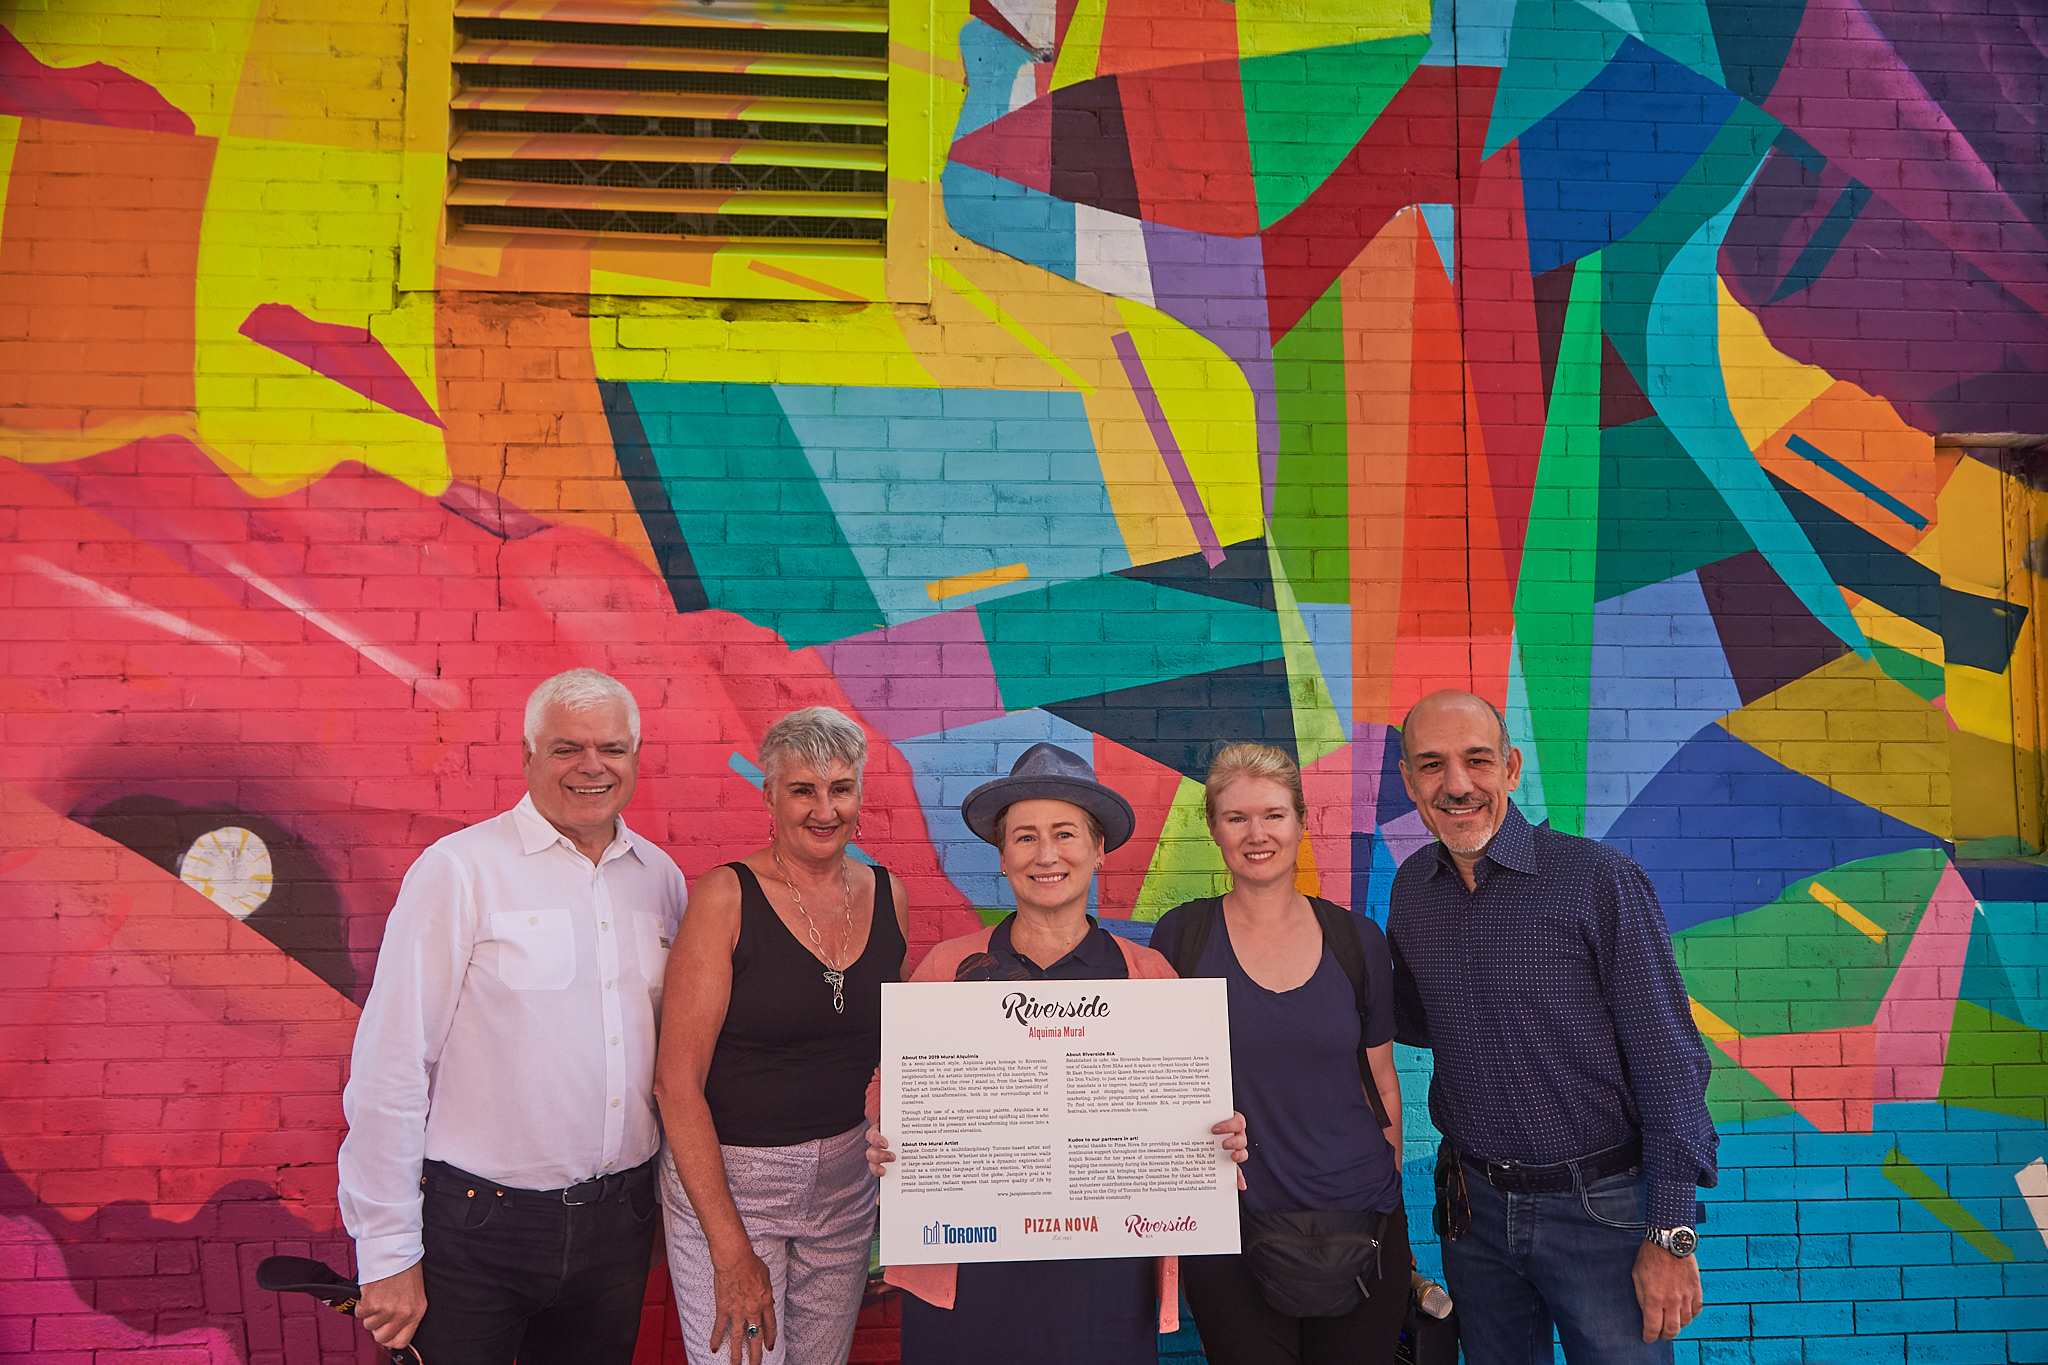 Toronto’s Riverside BIA Celebrates Local Vitality with Mural Launch and New Pollinator Garden